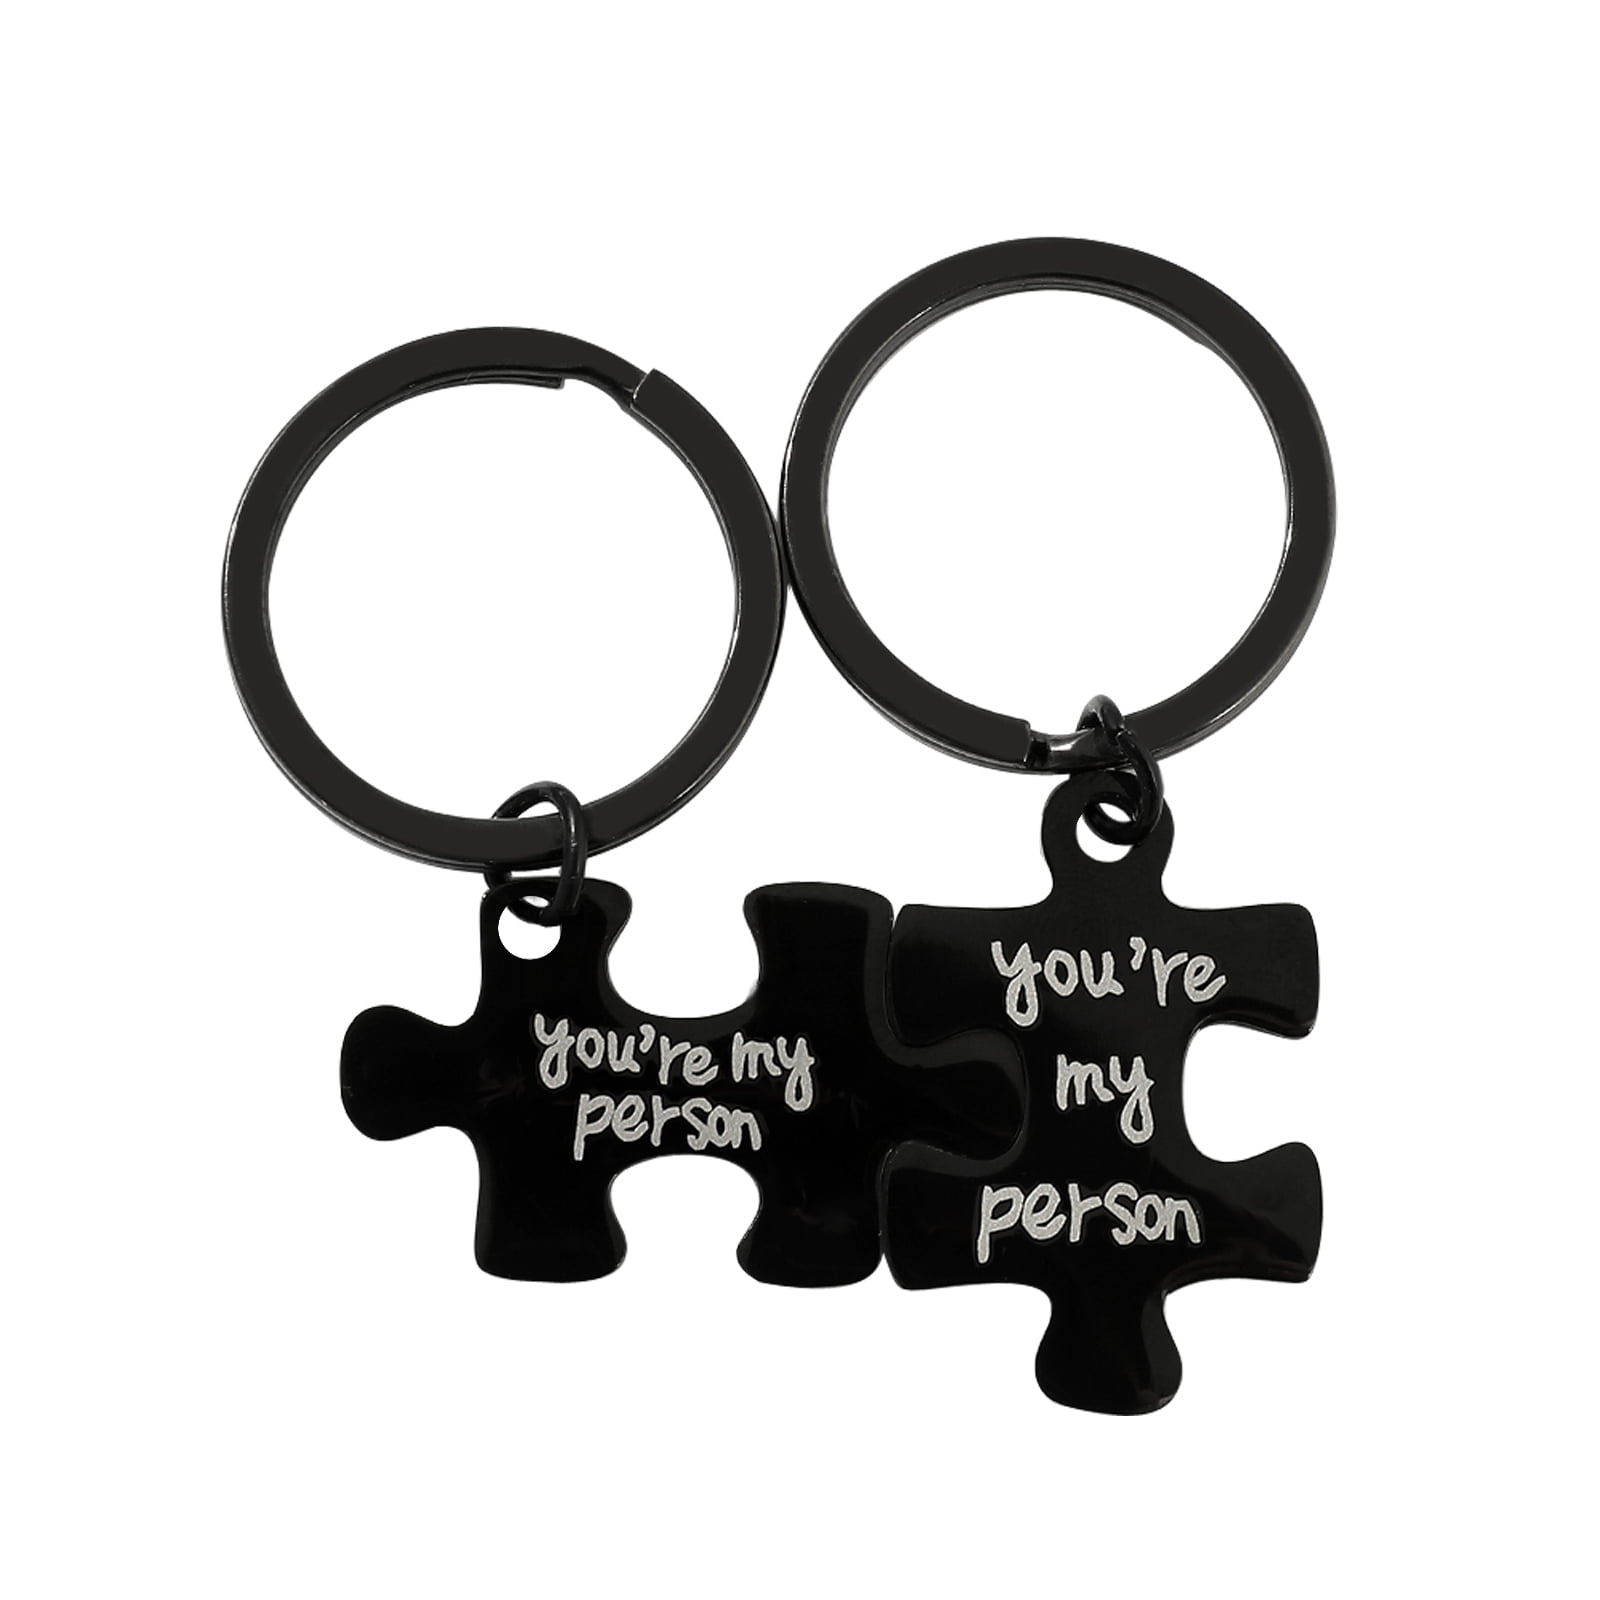 2 Pcs Key Chain,Novelty Keychains with Key Rings Car Keychain for Women and Men Great Gift for Friends 